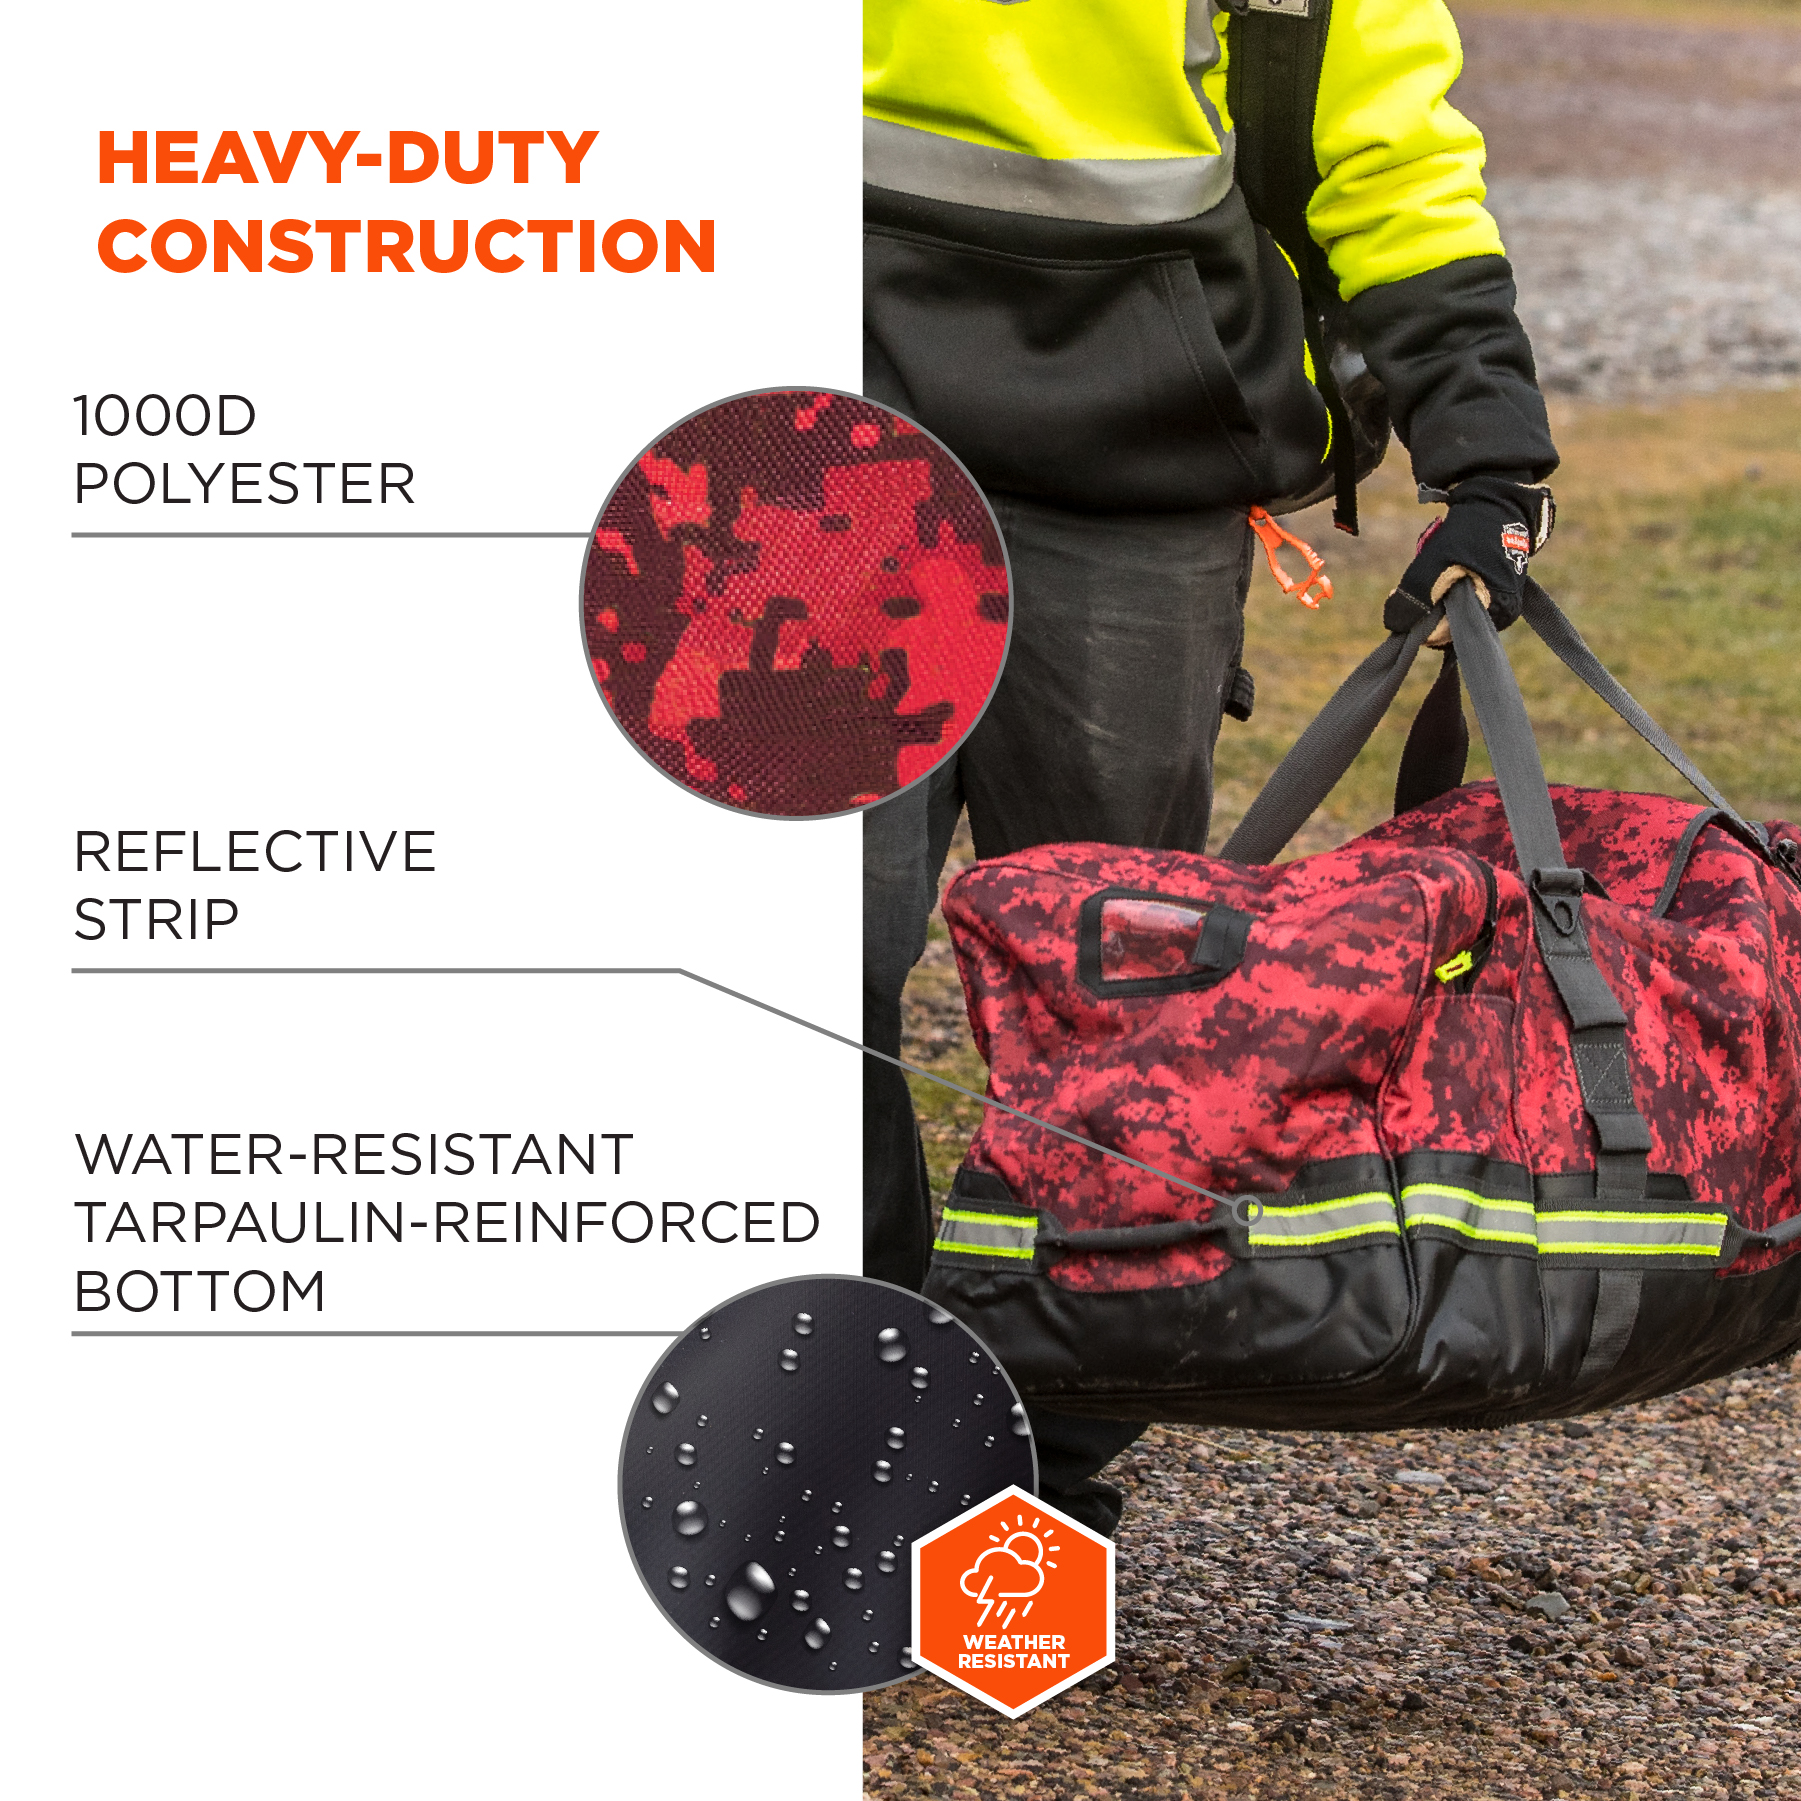 https://www.ergodyne.com/sites/default/files/product-images/13008-5008-firefighter-turnout-bag-red-heavy-duty-construction.jpg